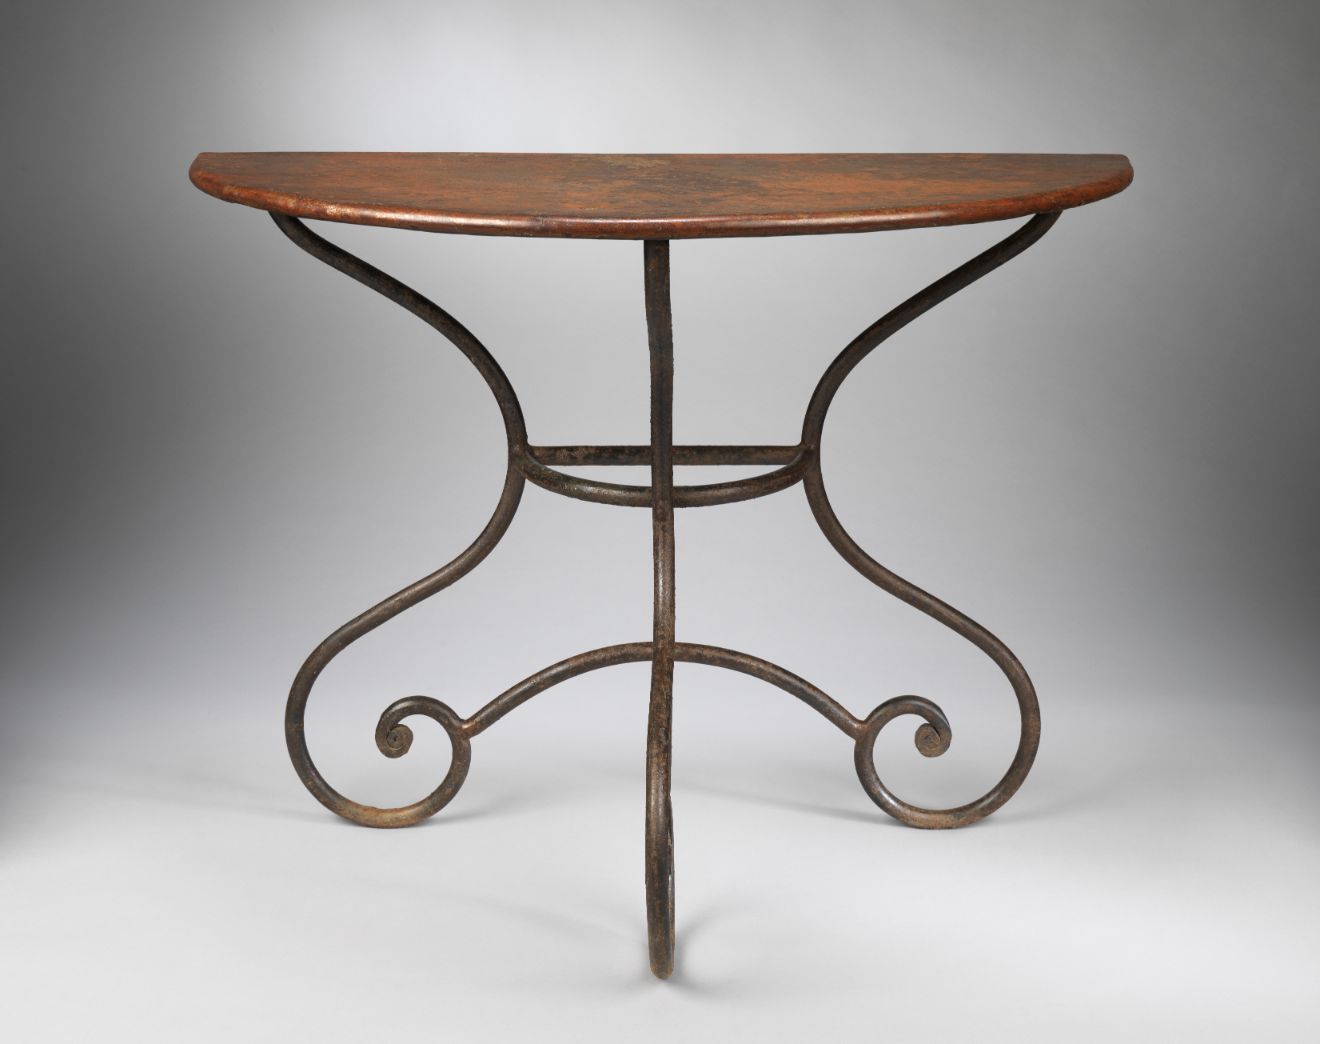 Strikingly Graphic Pair of Demi-Lune Console Tables